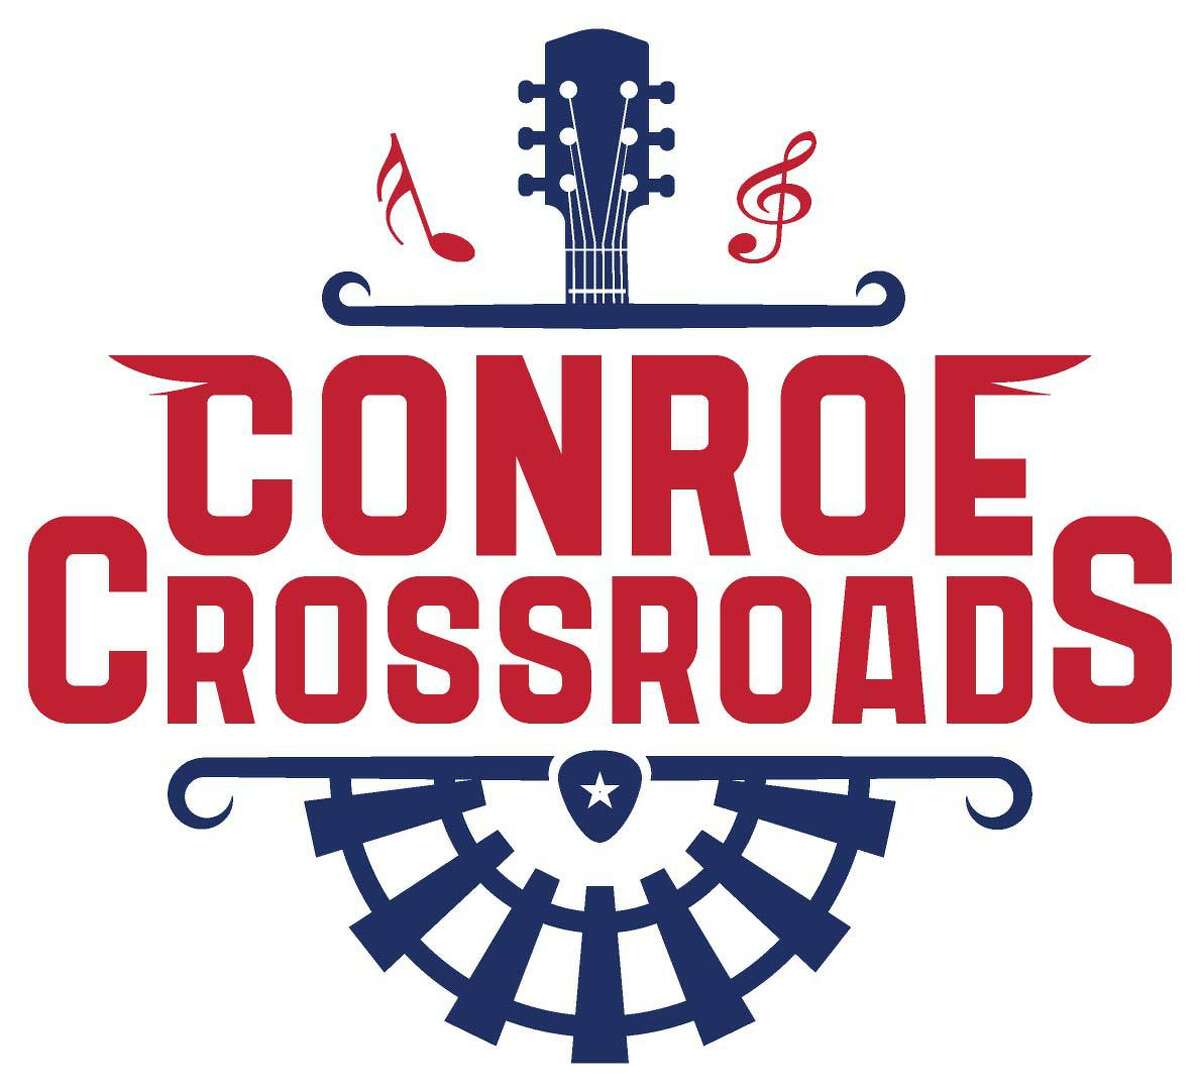 The Conroe Crossroads Music Festival will fill downtown Conroe with tunes Thursday through Sunday.